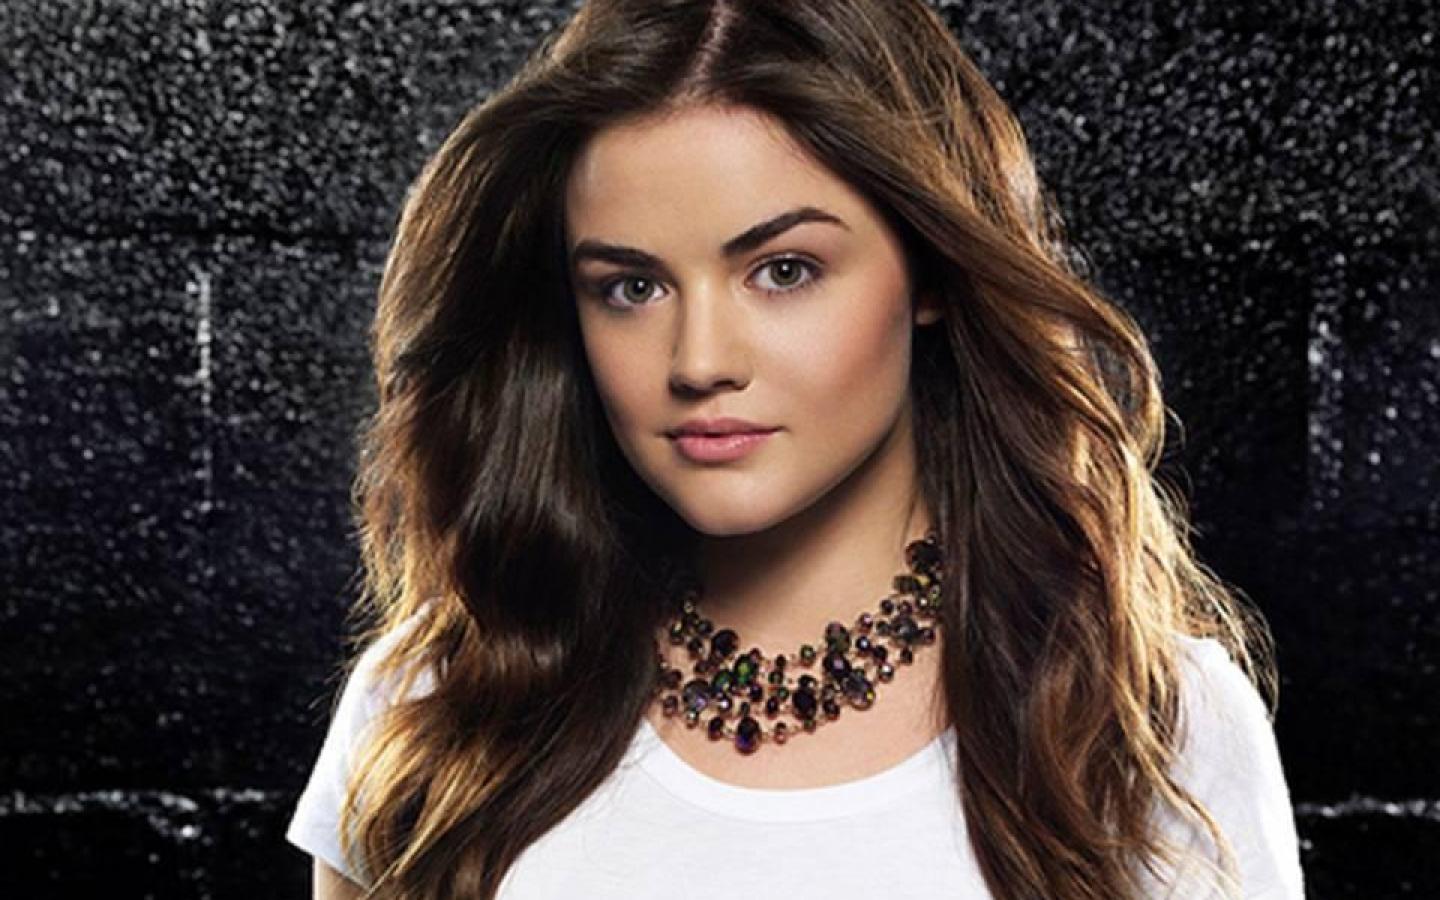 Wallpaper Tags: gorgeous lucy actress lucy hale model hale